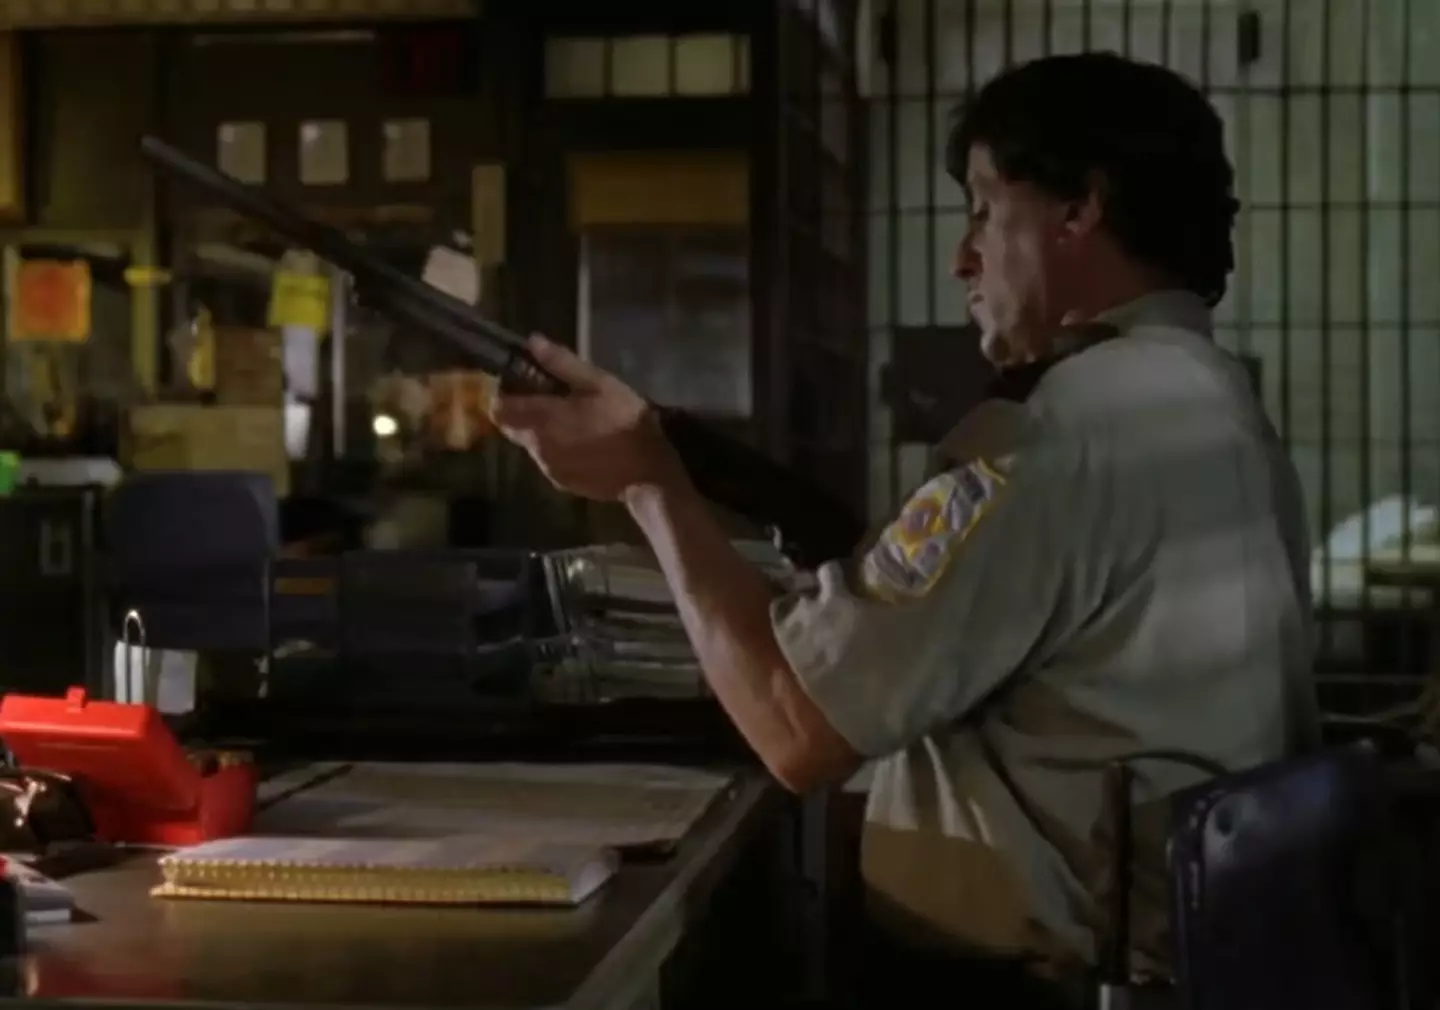 Lots reckon Cop Land has Sylvester Stallone's best performance as a small town sheriff dealing with big city cops.